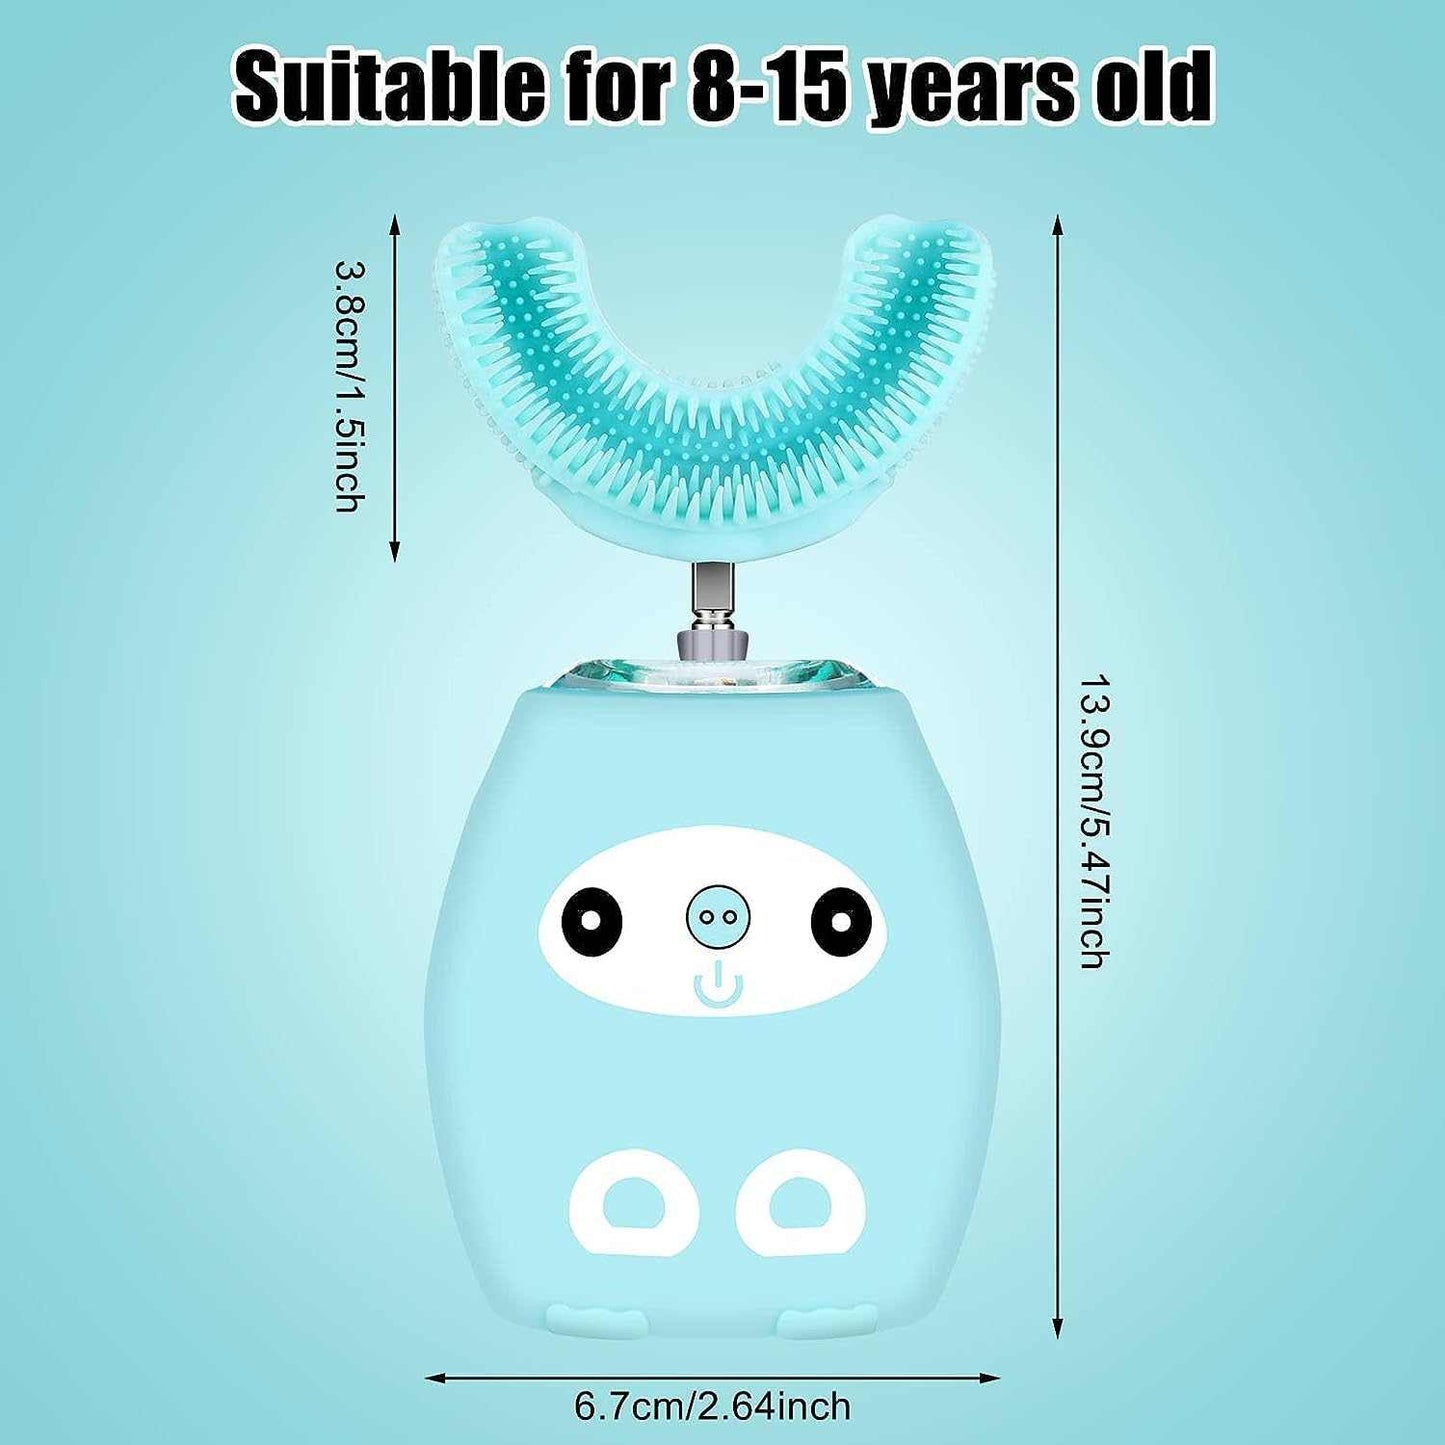 Ziliny Kids U-Shaped Electric Toothbrush - Kids U Shaped Toothbrush, Kids Automatic Timer Tooth Brush, Ultrasonic Automatic Toothbrush- 3 Cleaning Modes, Waterproof Auto Toothbrush for Children (Age 3-7, Blue! 🦷 - A Horizon Dawn